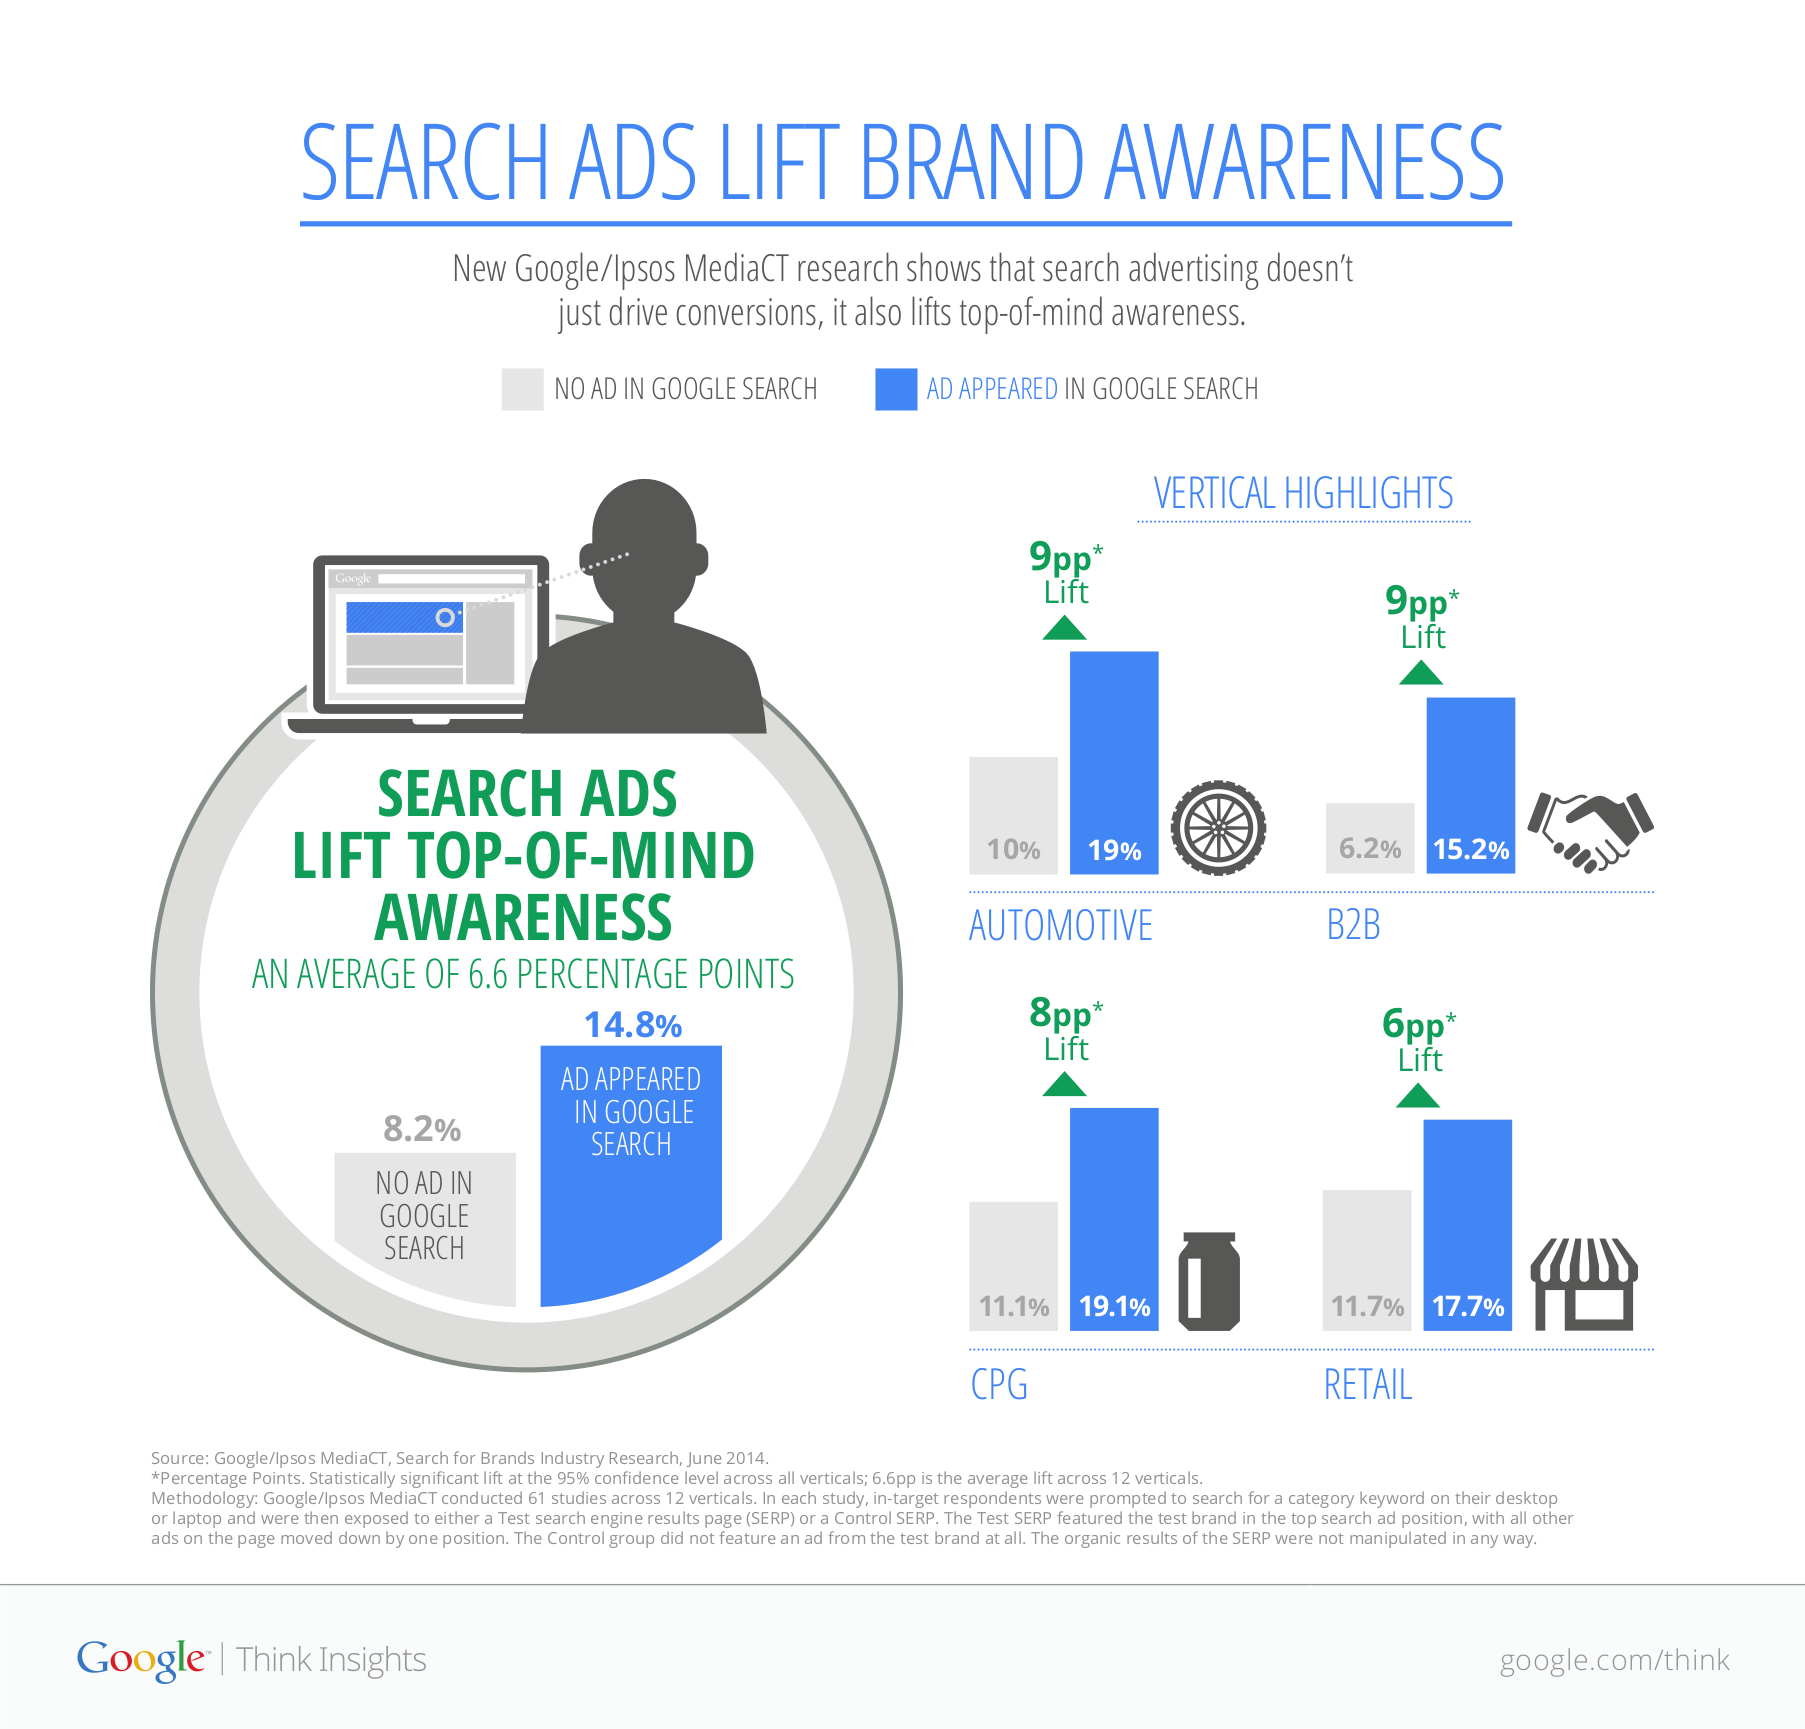 Search ads lift top-of-mind awareness statistics